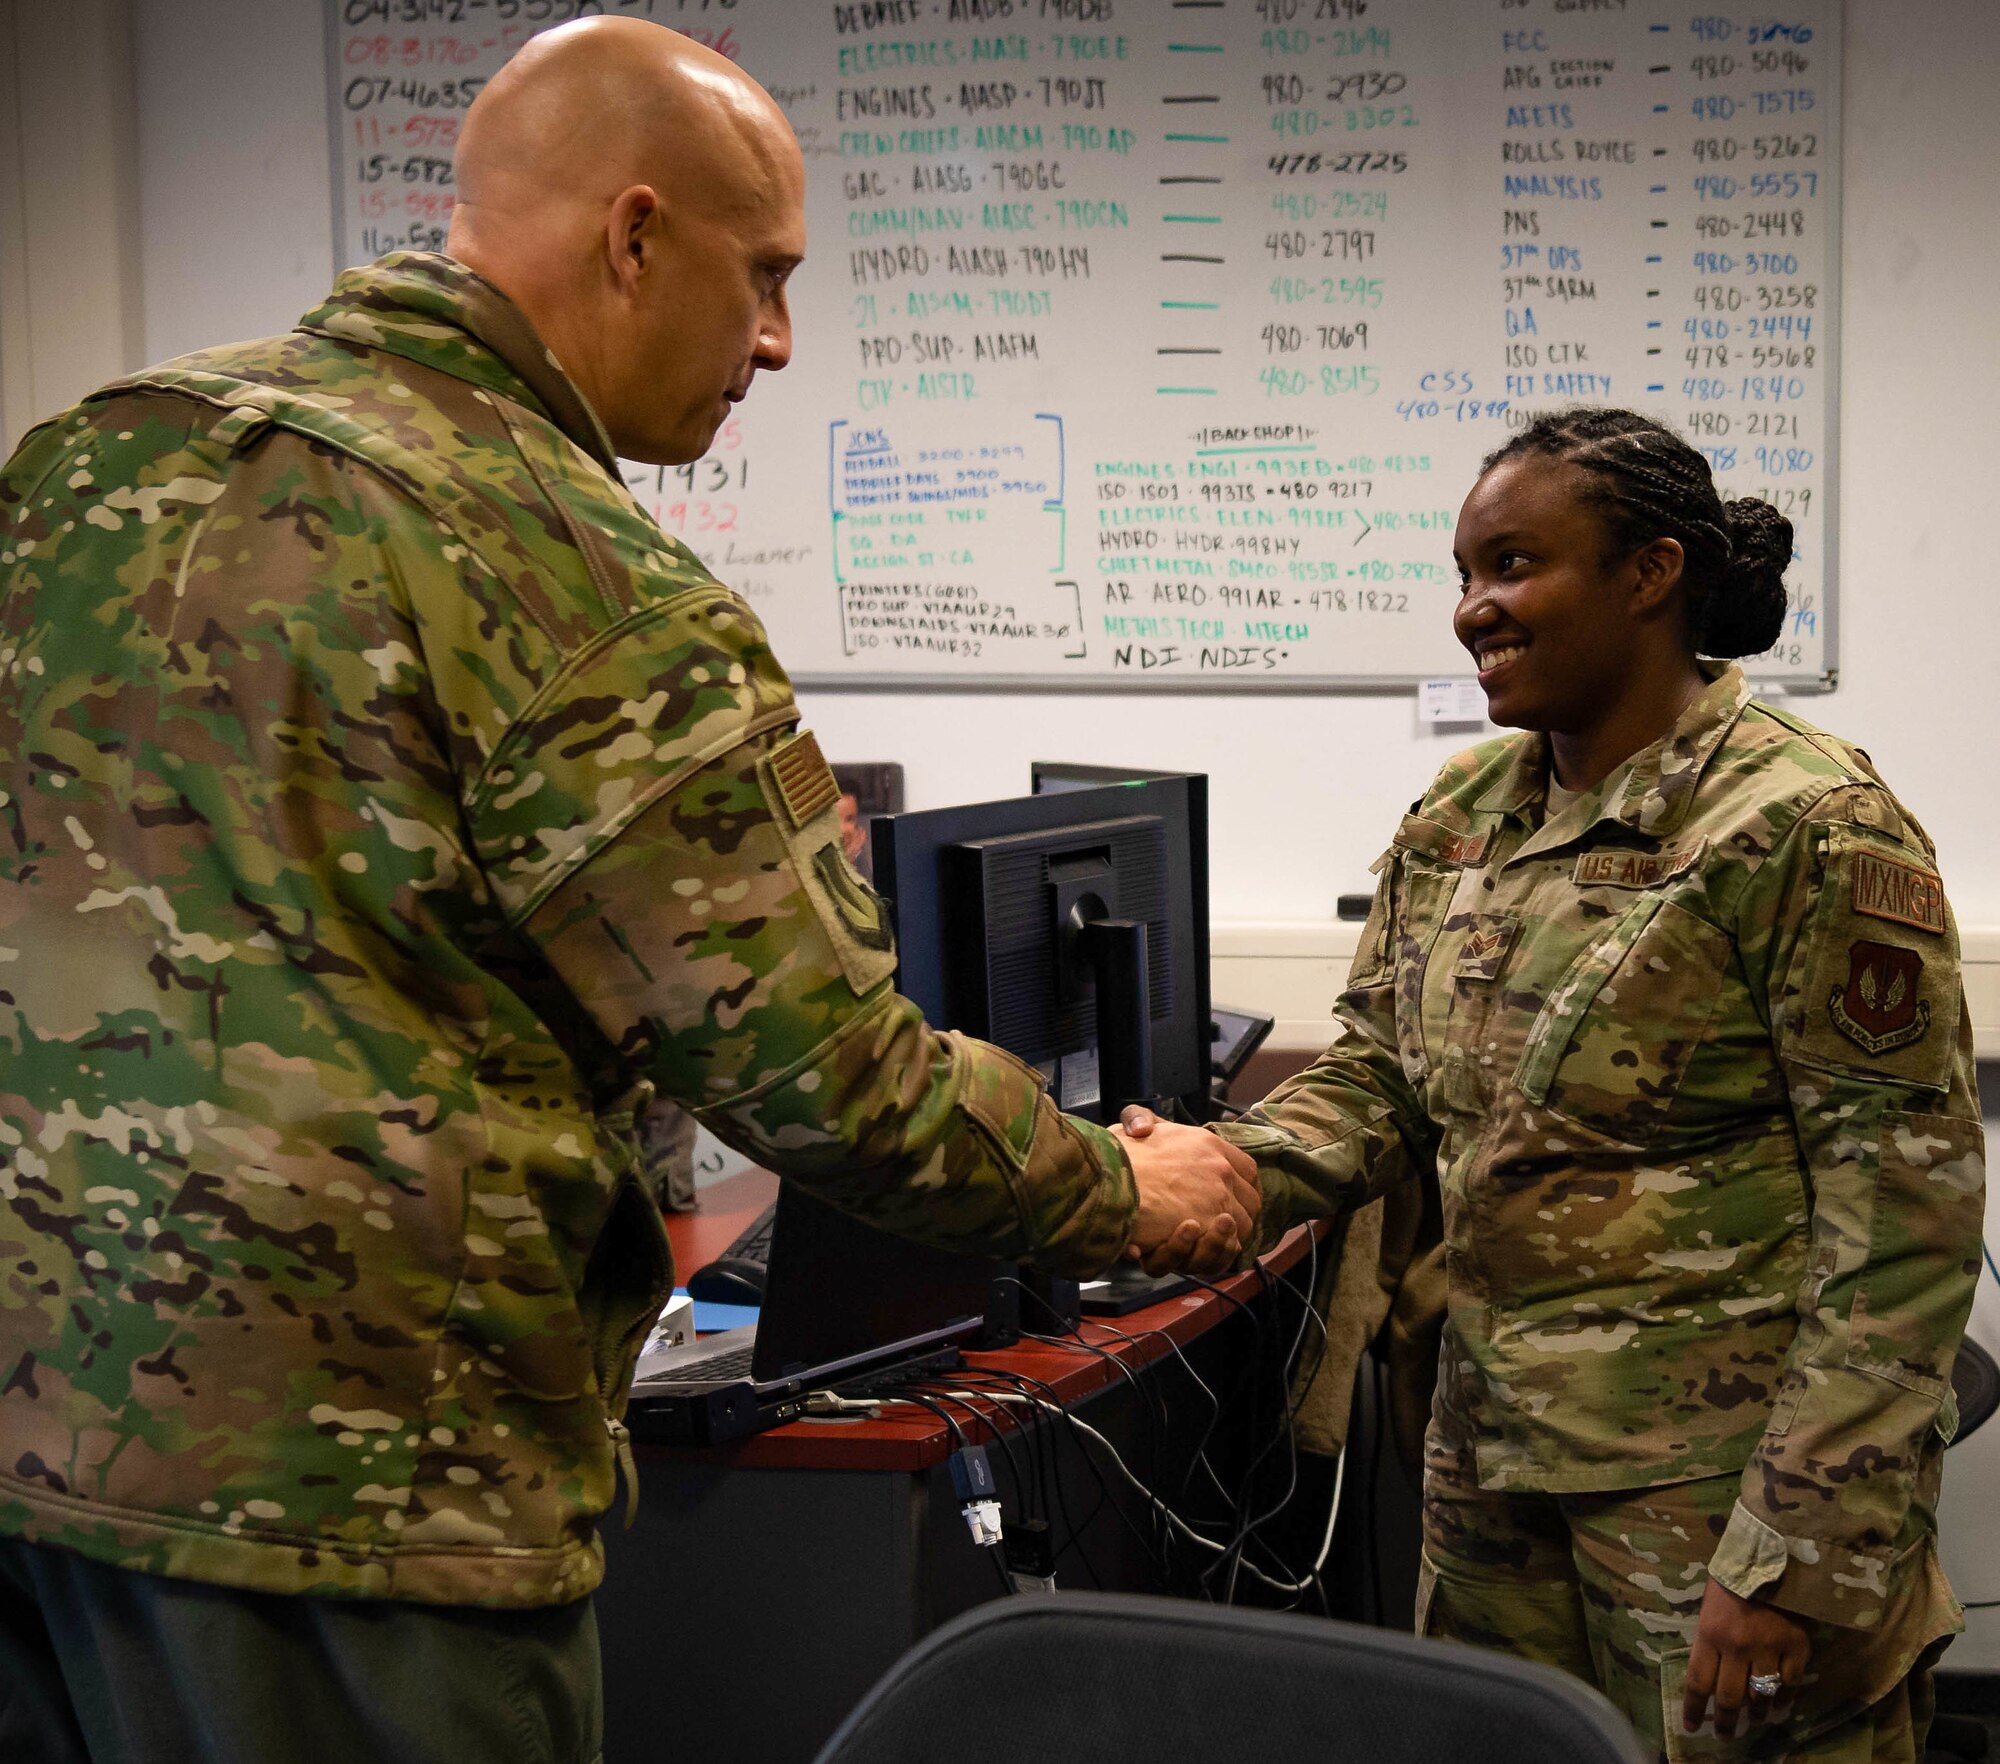 Airman shakes hands with General during coining.